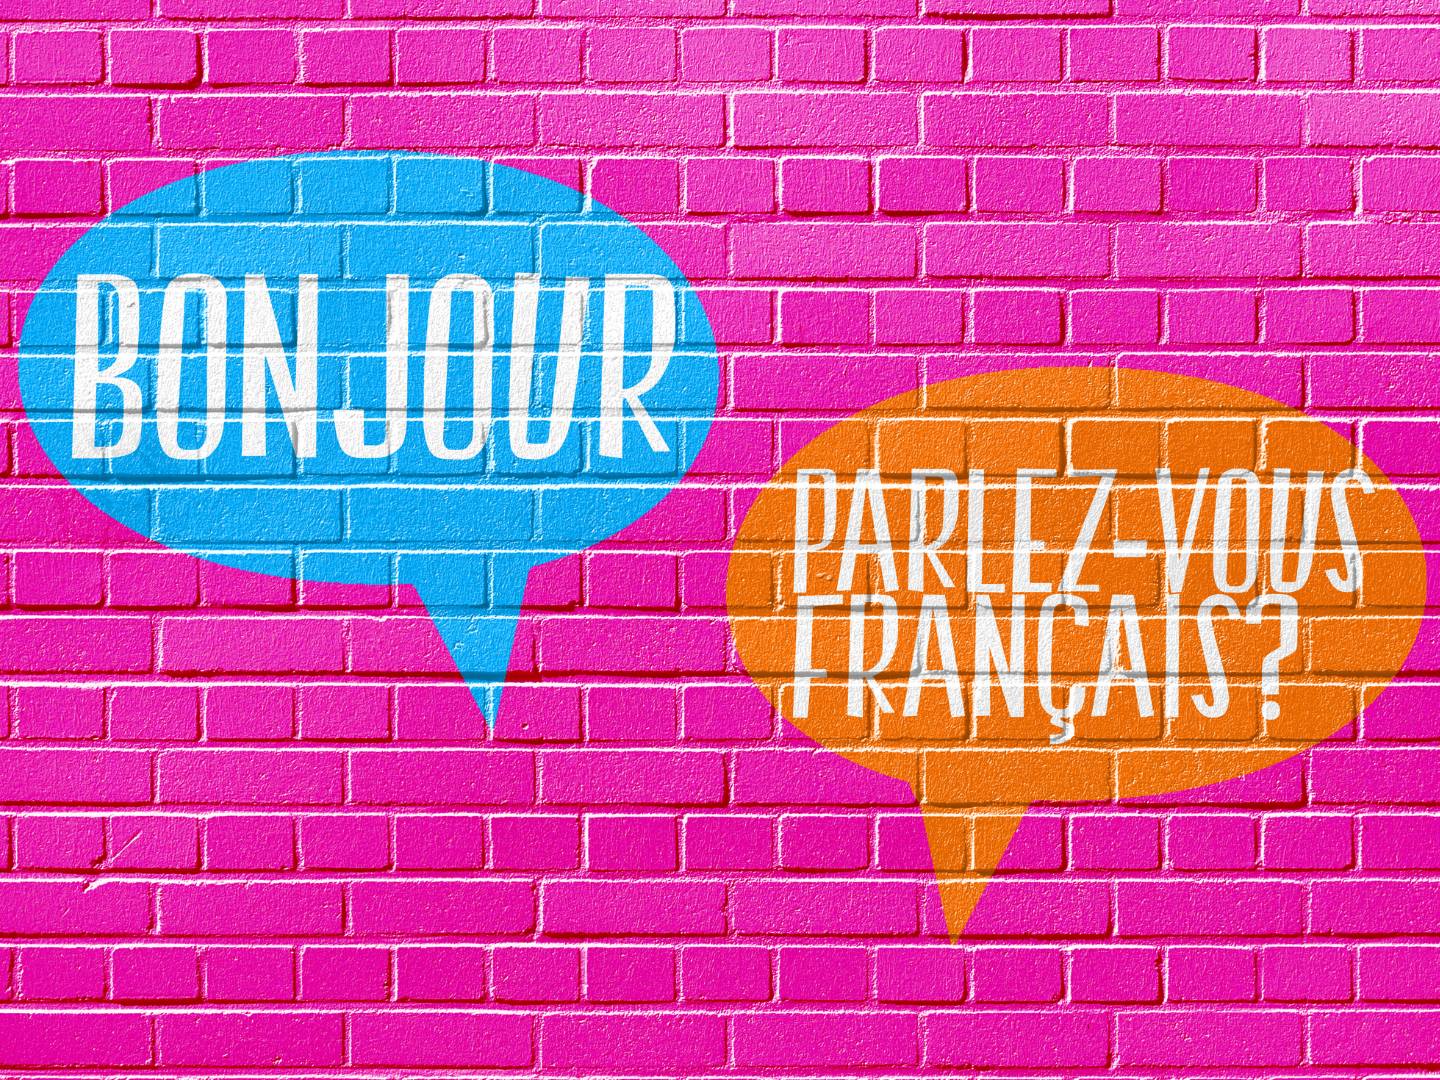 Do French people speak English or should expats learn French?